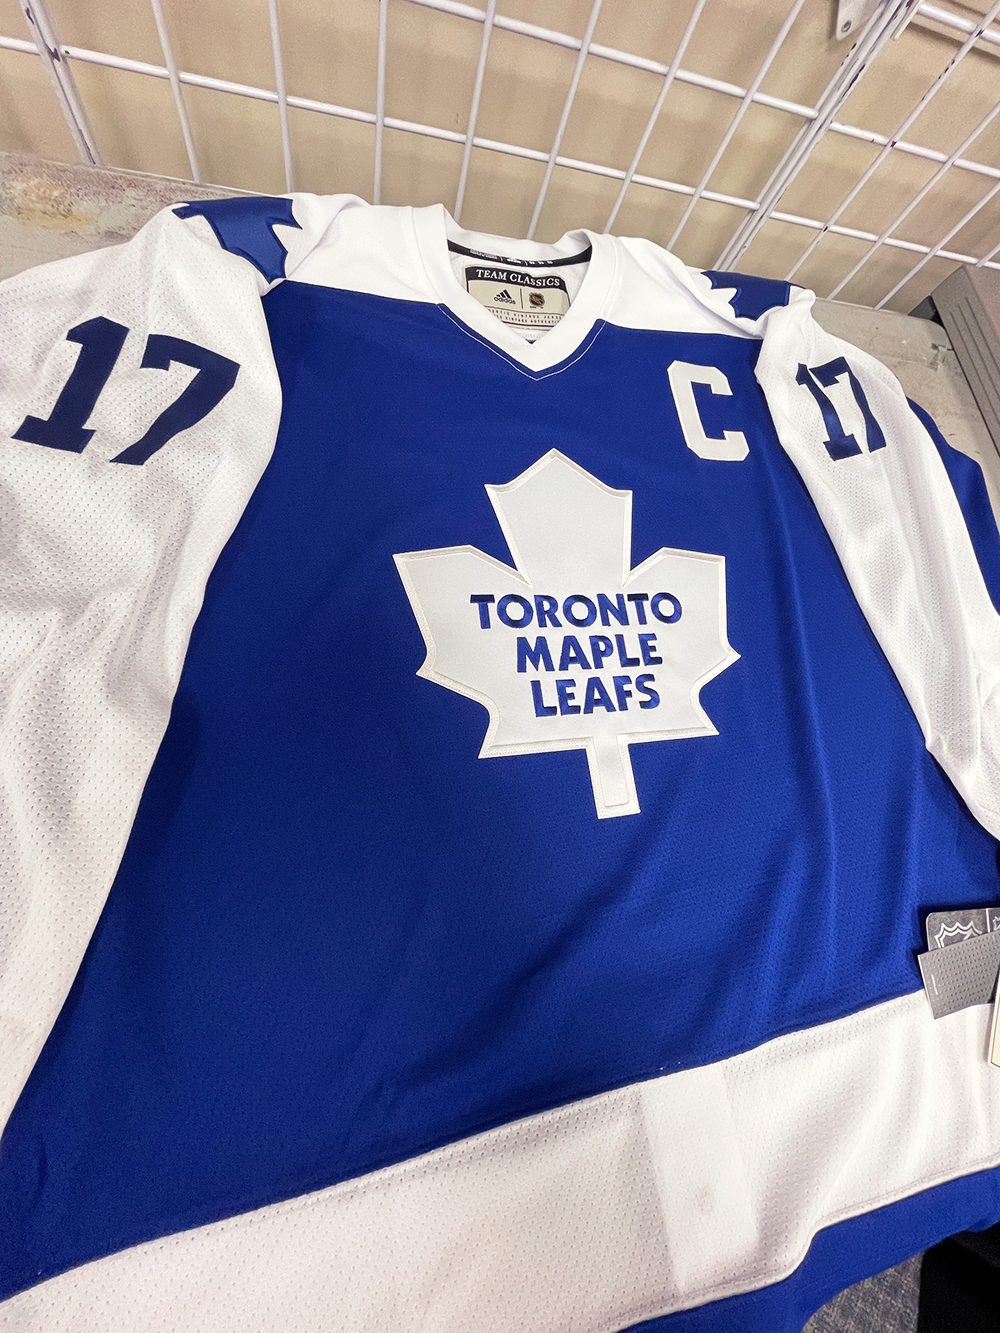 Game Issued Toronto Maple Leafs 2014 Winter Classic NHL Hockey Jersey 58+  GOALIE